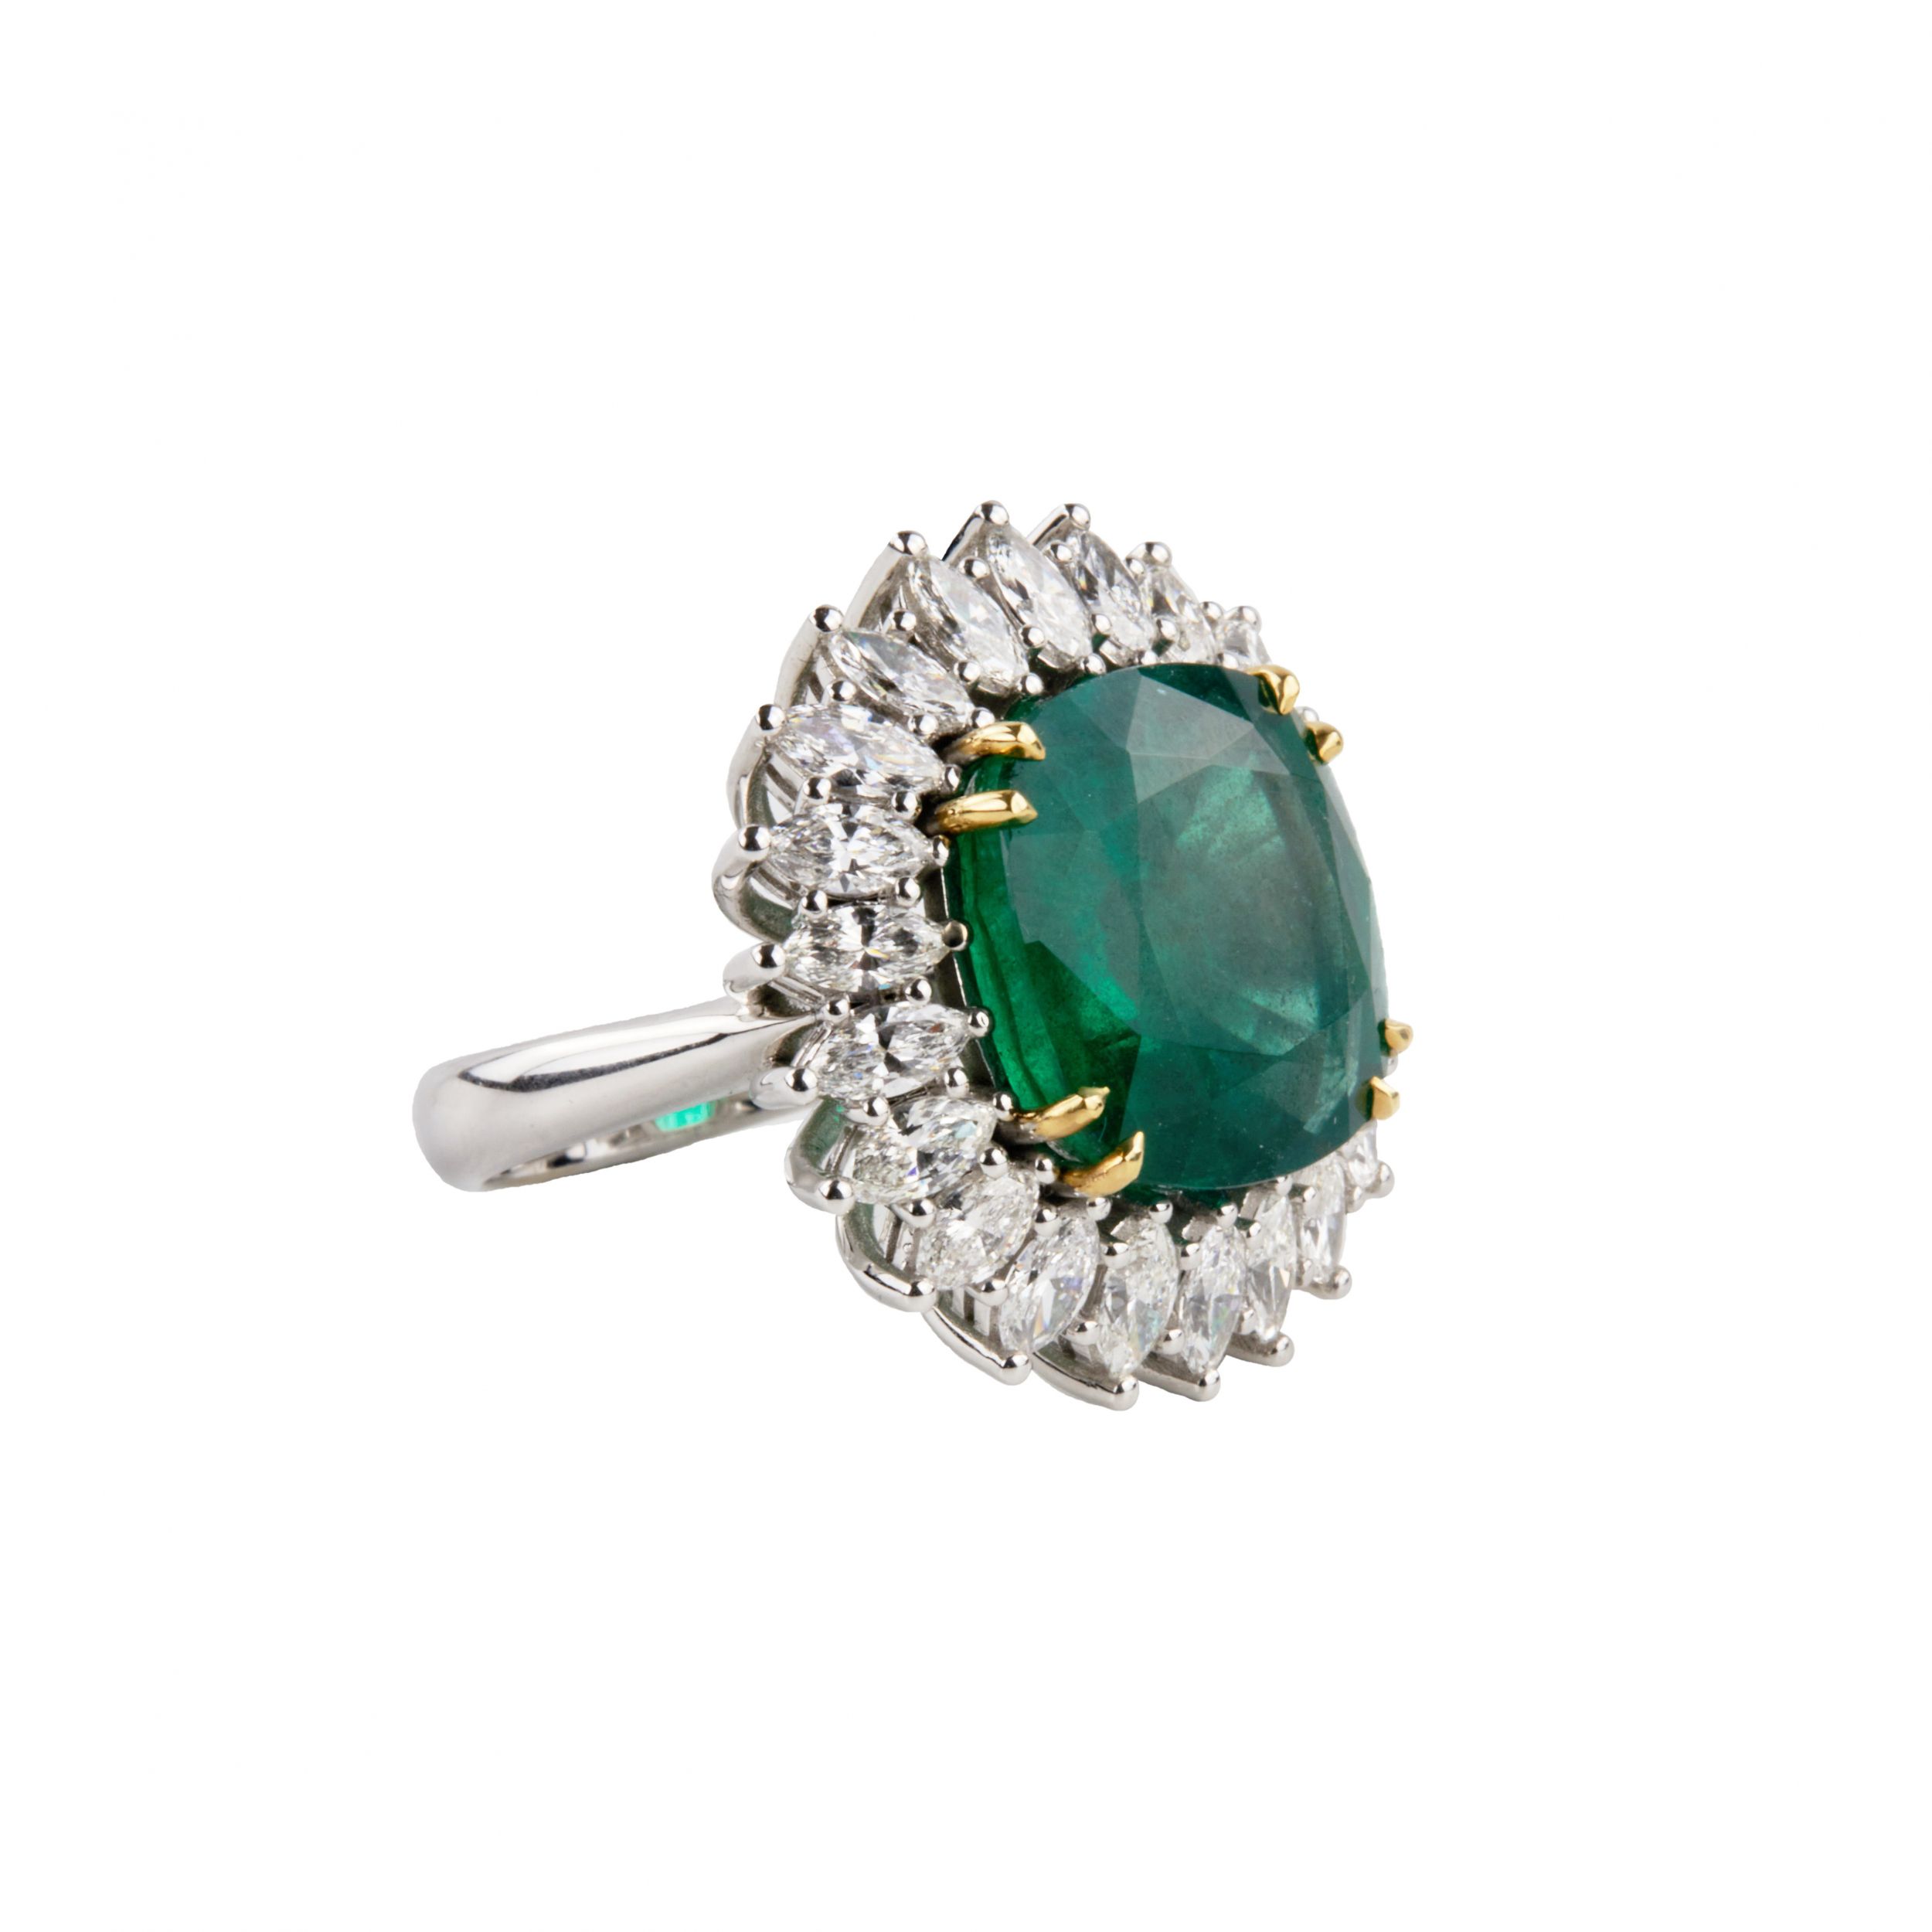 White gold ring with emerald and diamonds. - Image 5 of 7